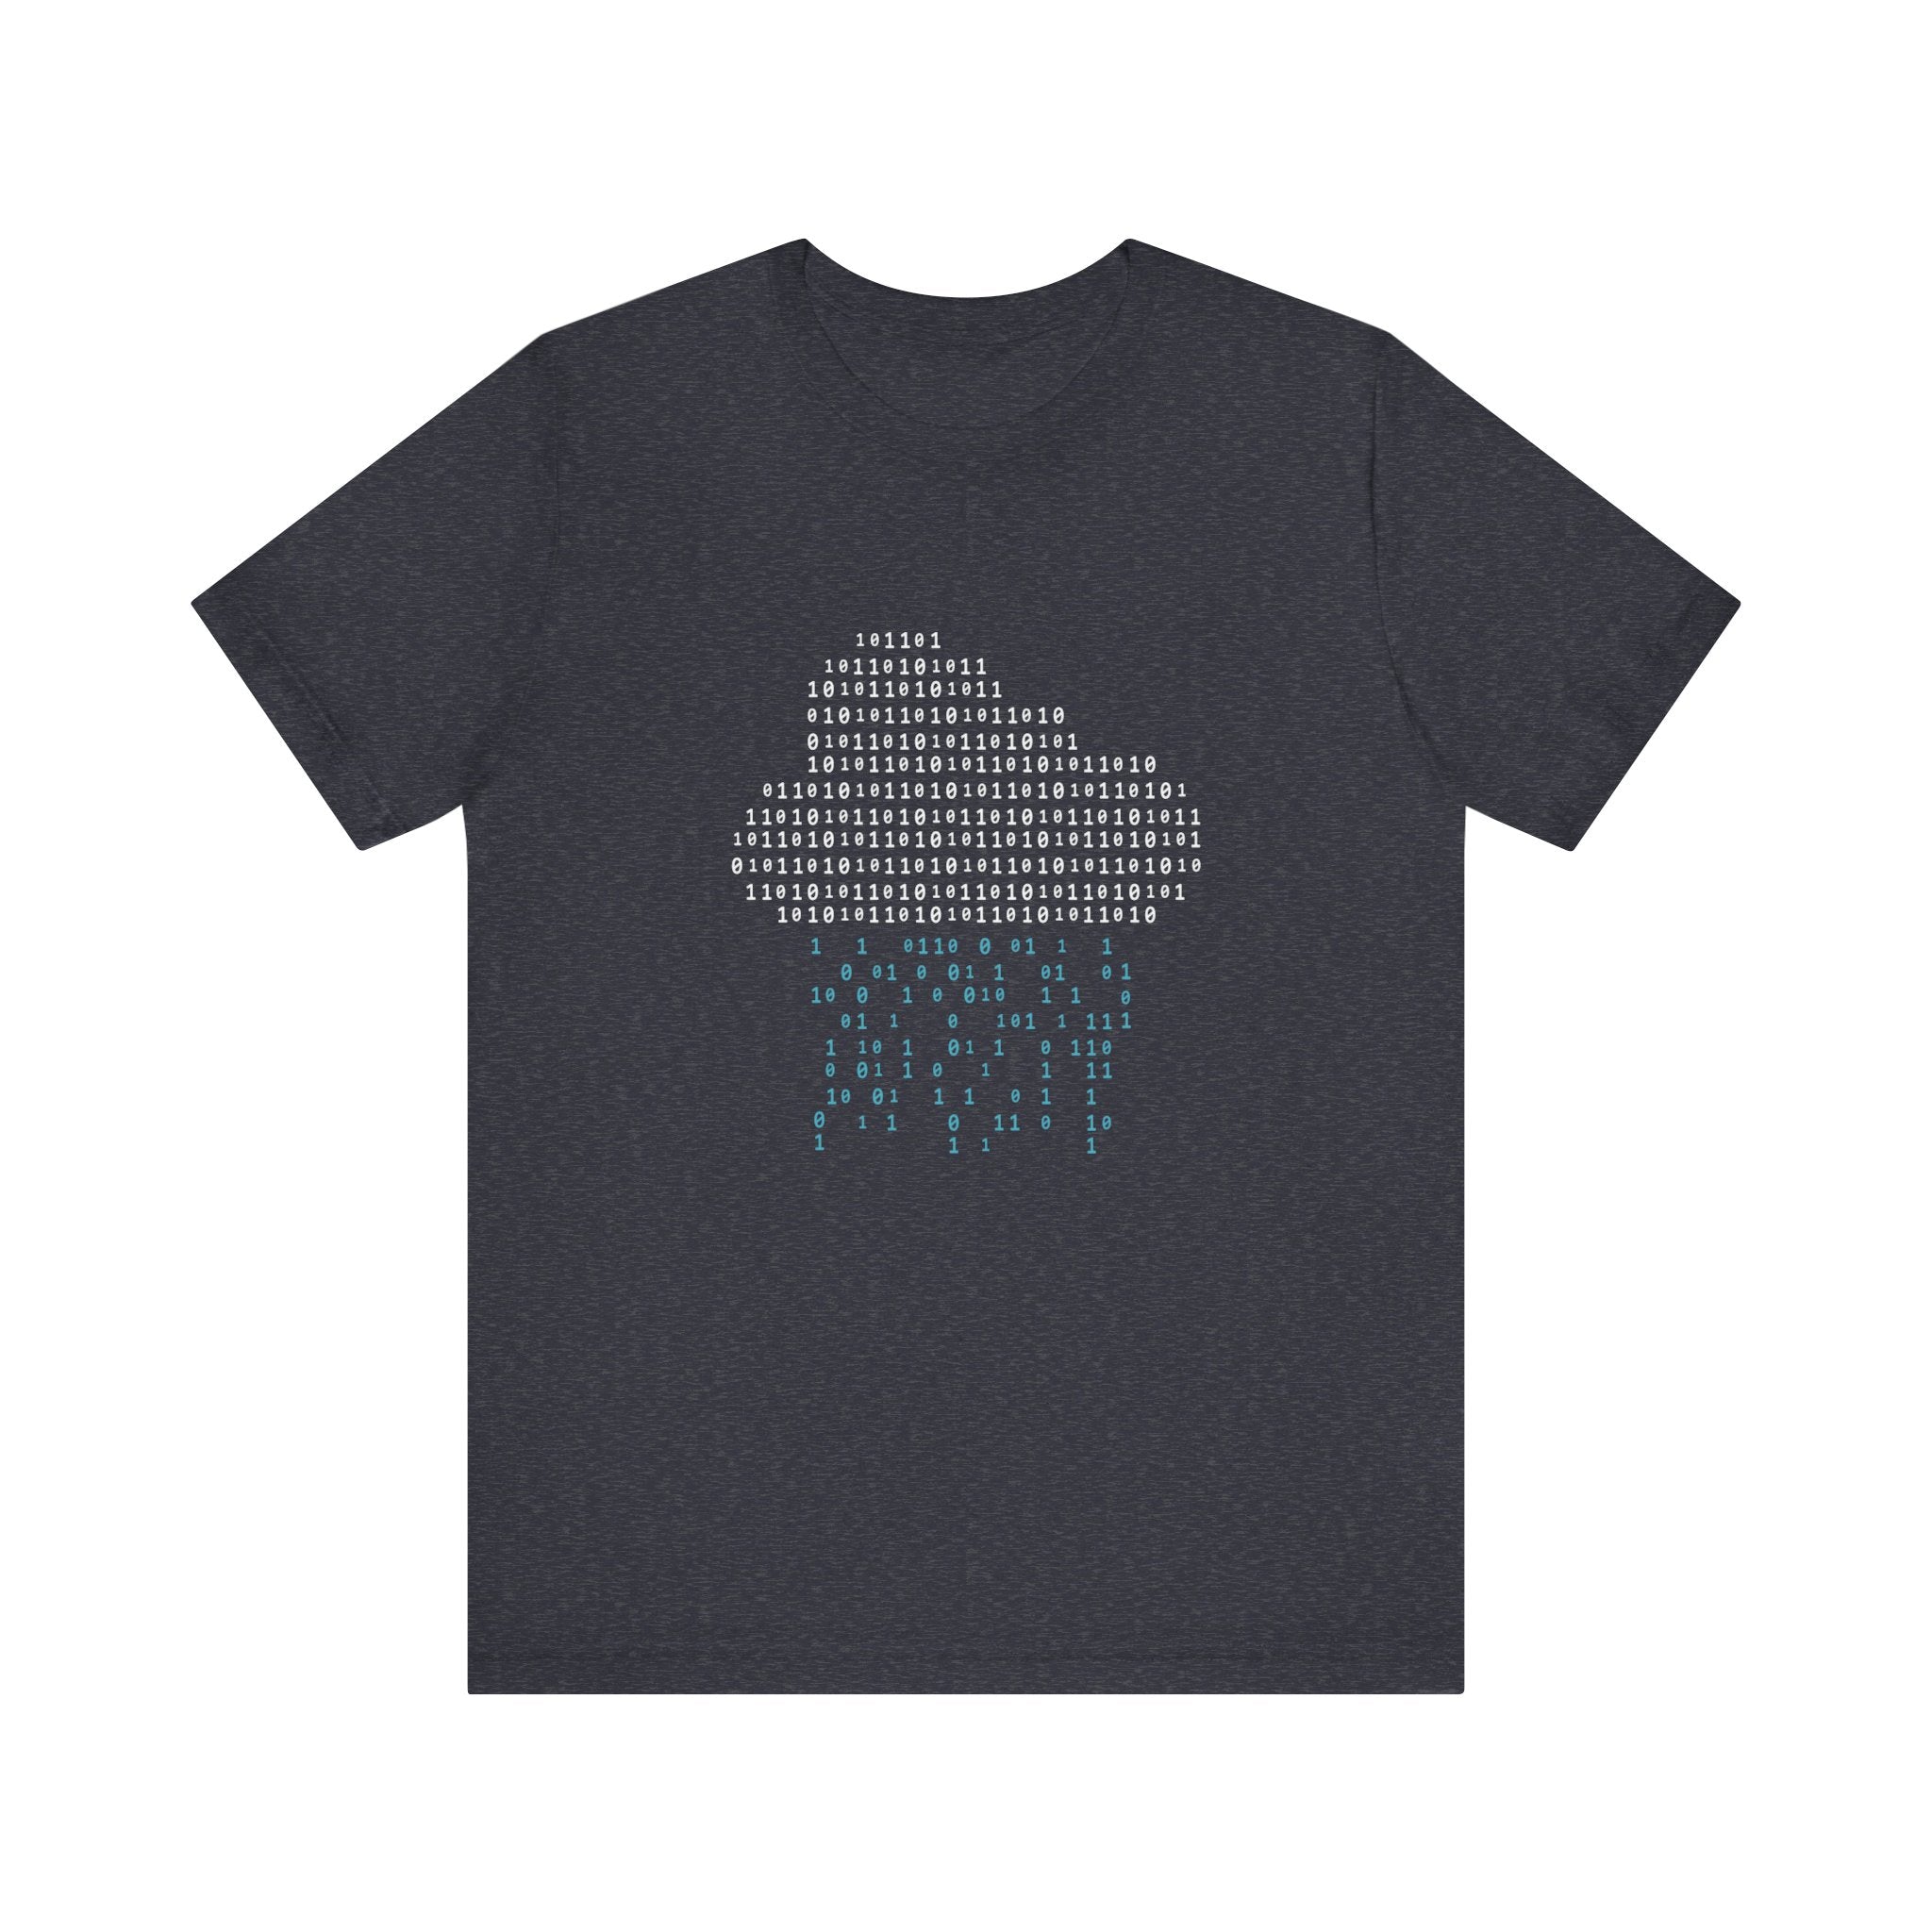 This Binary Rain Cloud - T-Shirt features a digital design of a cloud made of binary code with binary "raindrops" falling from it, crafted from soft Airlume combed and ring-spun cotton for maximum comfort.